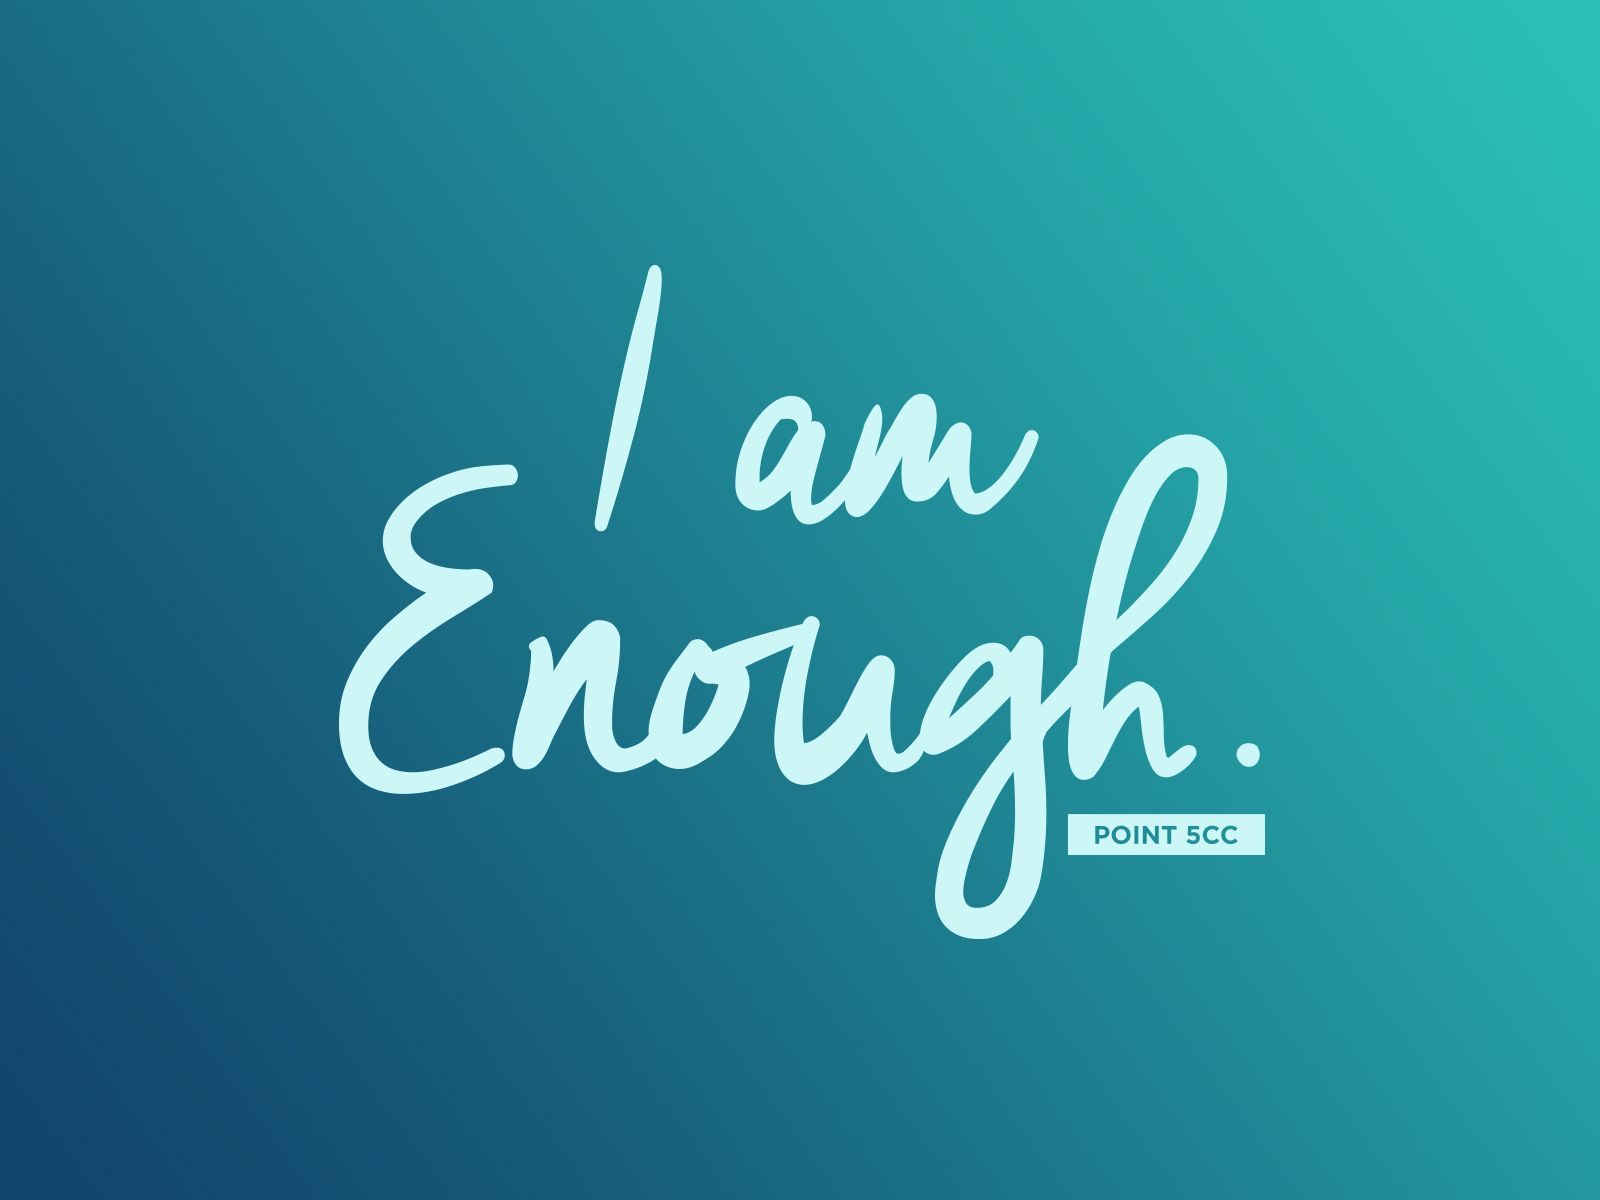 You are enough stock illustration. Illustration of design - 87729356